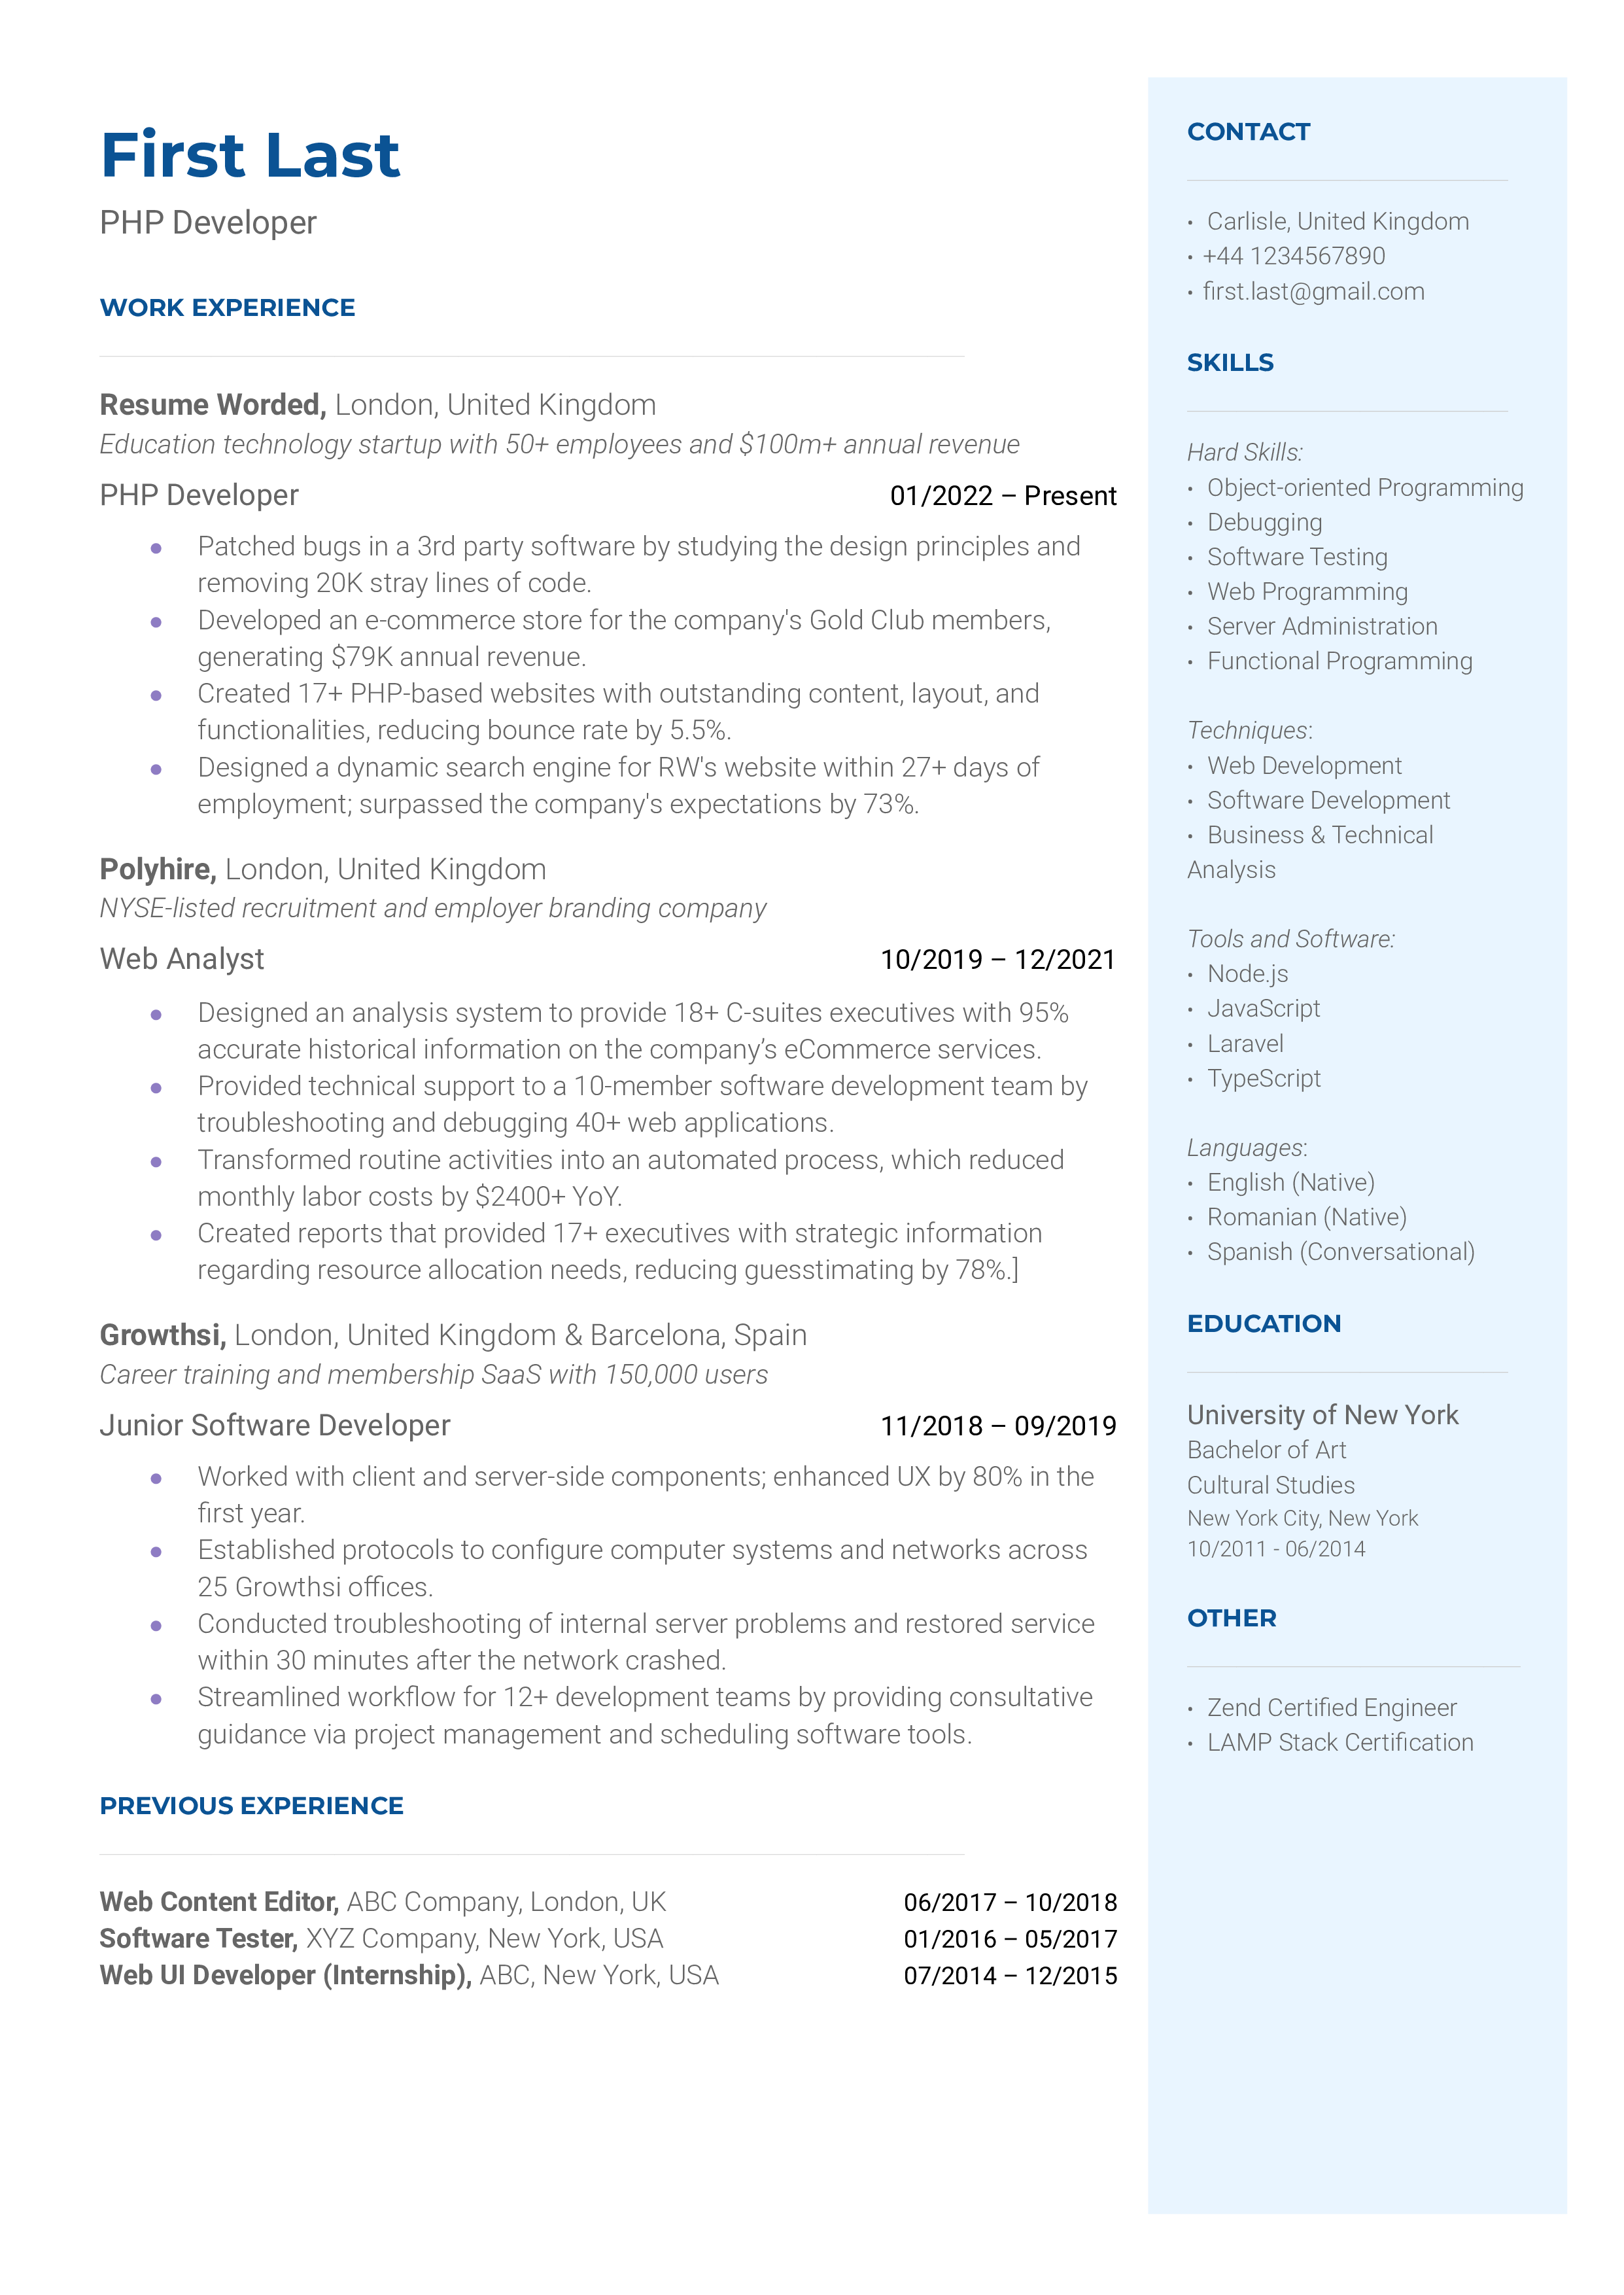 A resume for a PHP developer with a bachelors degree in IT and experience as a Java software engineer and programmer.